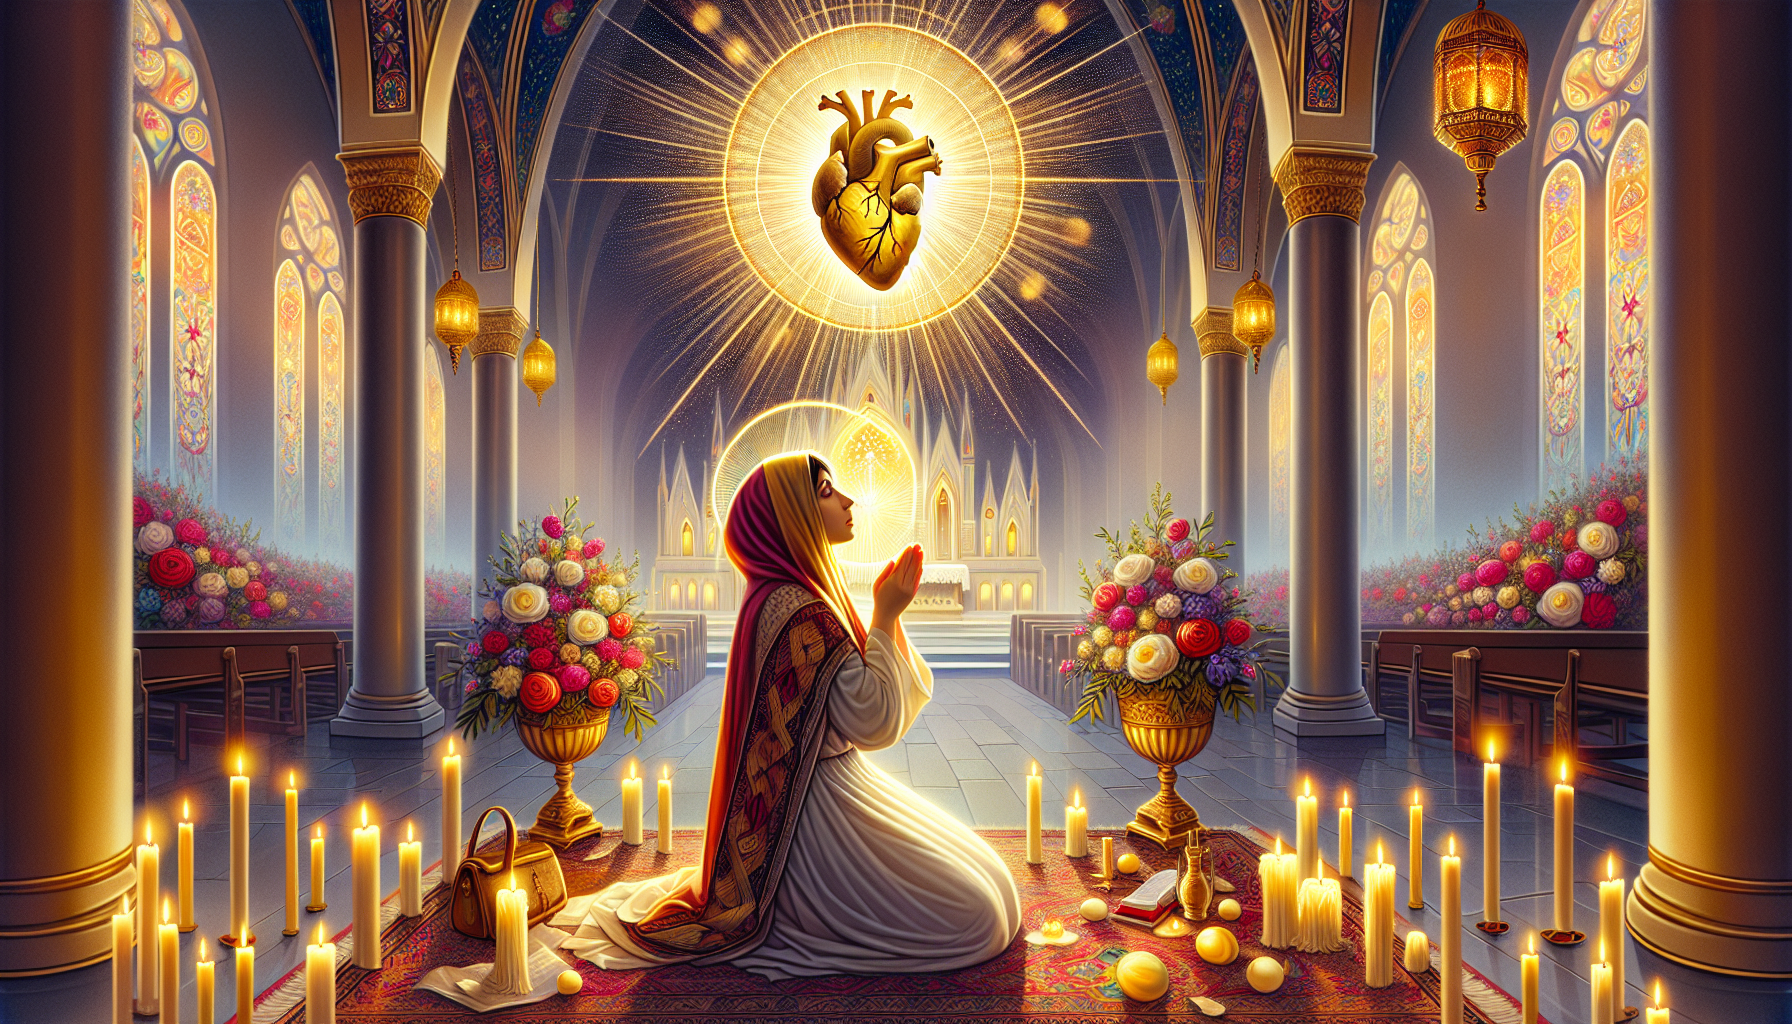 Create an image depicting a serene and spiritually uplifting scene for a guide on praying the Novena to the Sacred Heart. Show a devout person kneeling in prayer with a glowing, sacred heart symbol ra